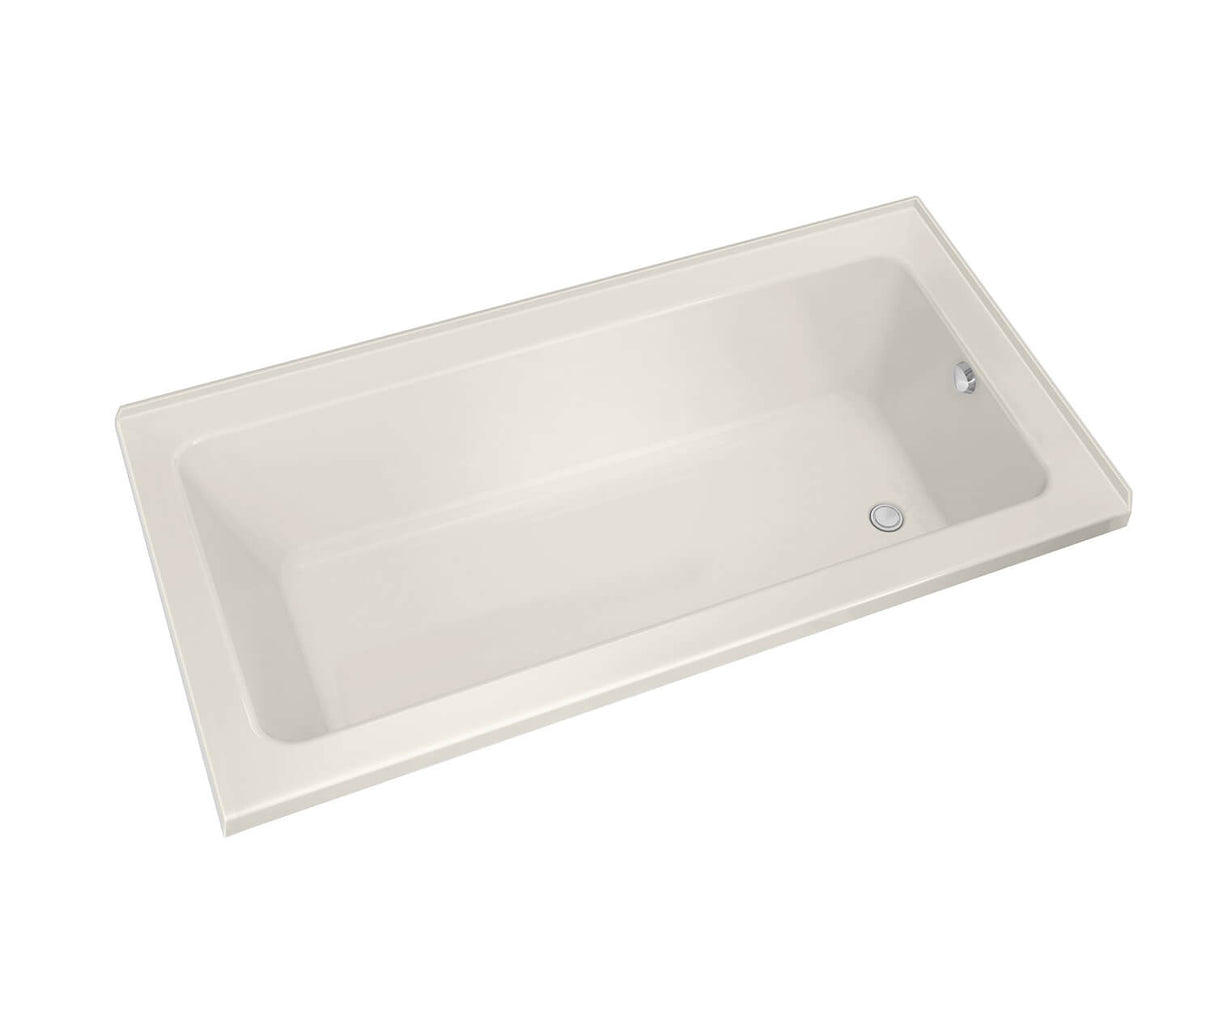 MAAX 106200-L-000-007 Pose 6030 IF Acrylic Corner Right Left-Hand Drain Bathtub in Biscuit